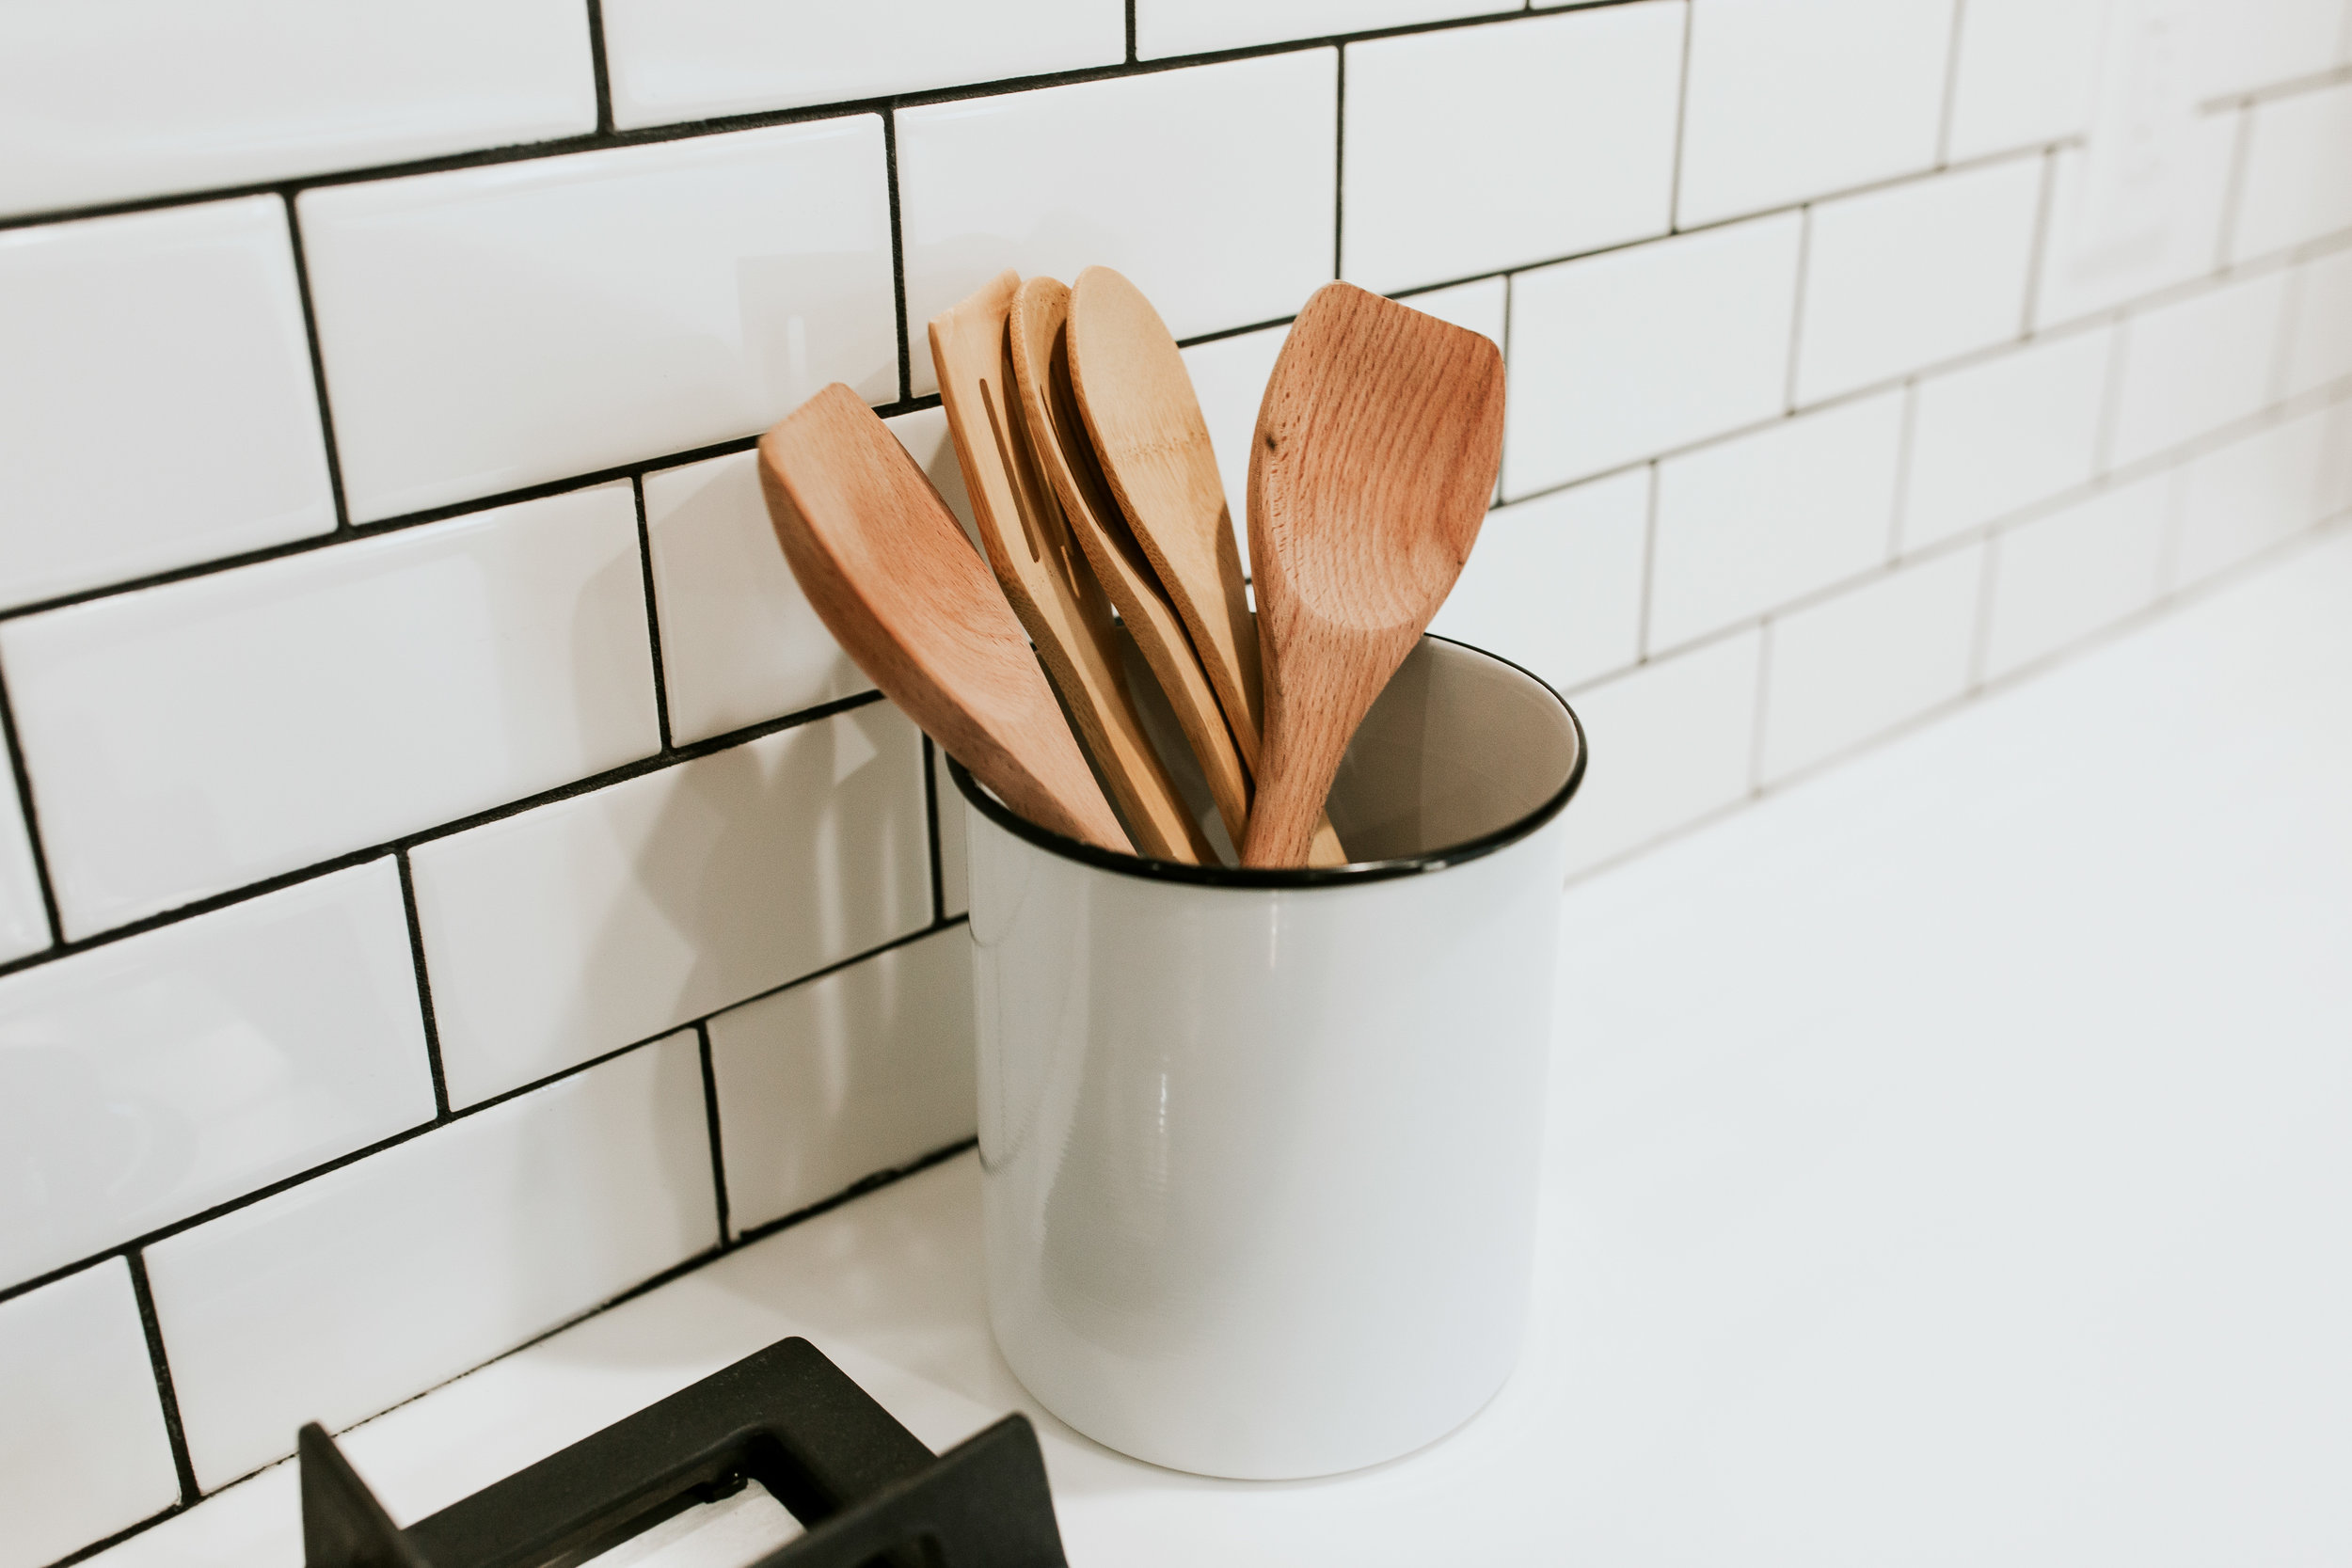 modern kitchen sources - Ikea kungsbacka cabinets, subway tile, modern decor, wood spoons, canister